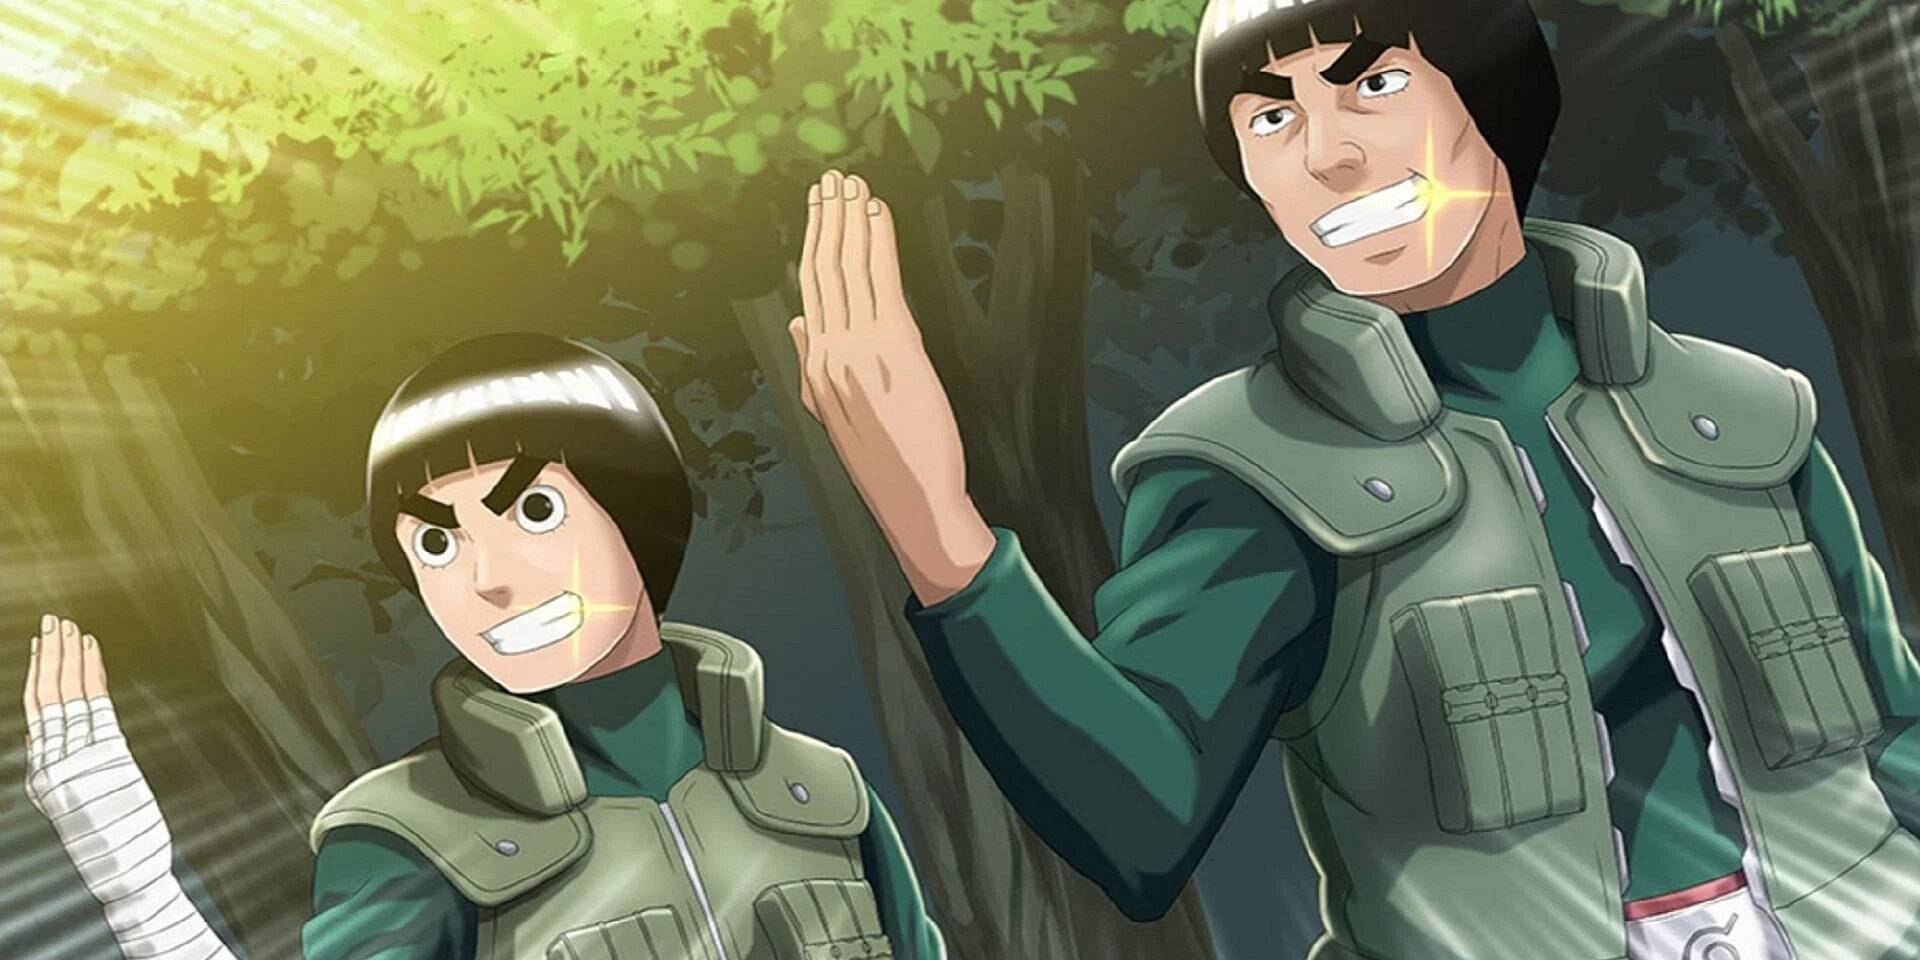 Might guy and rock lee